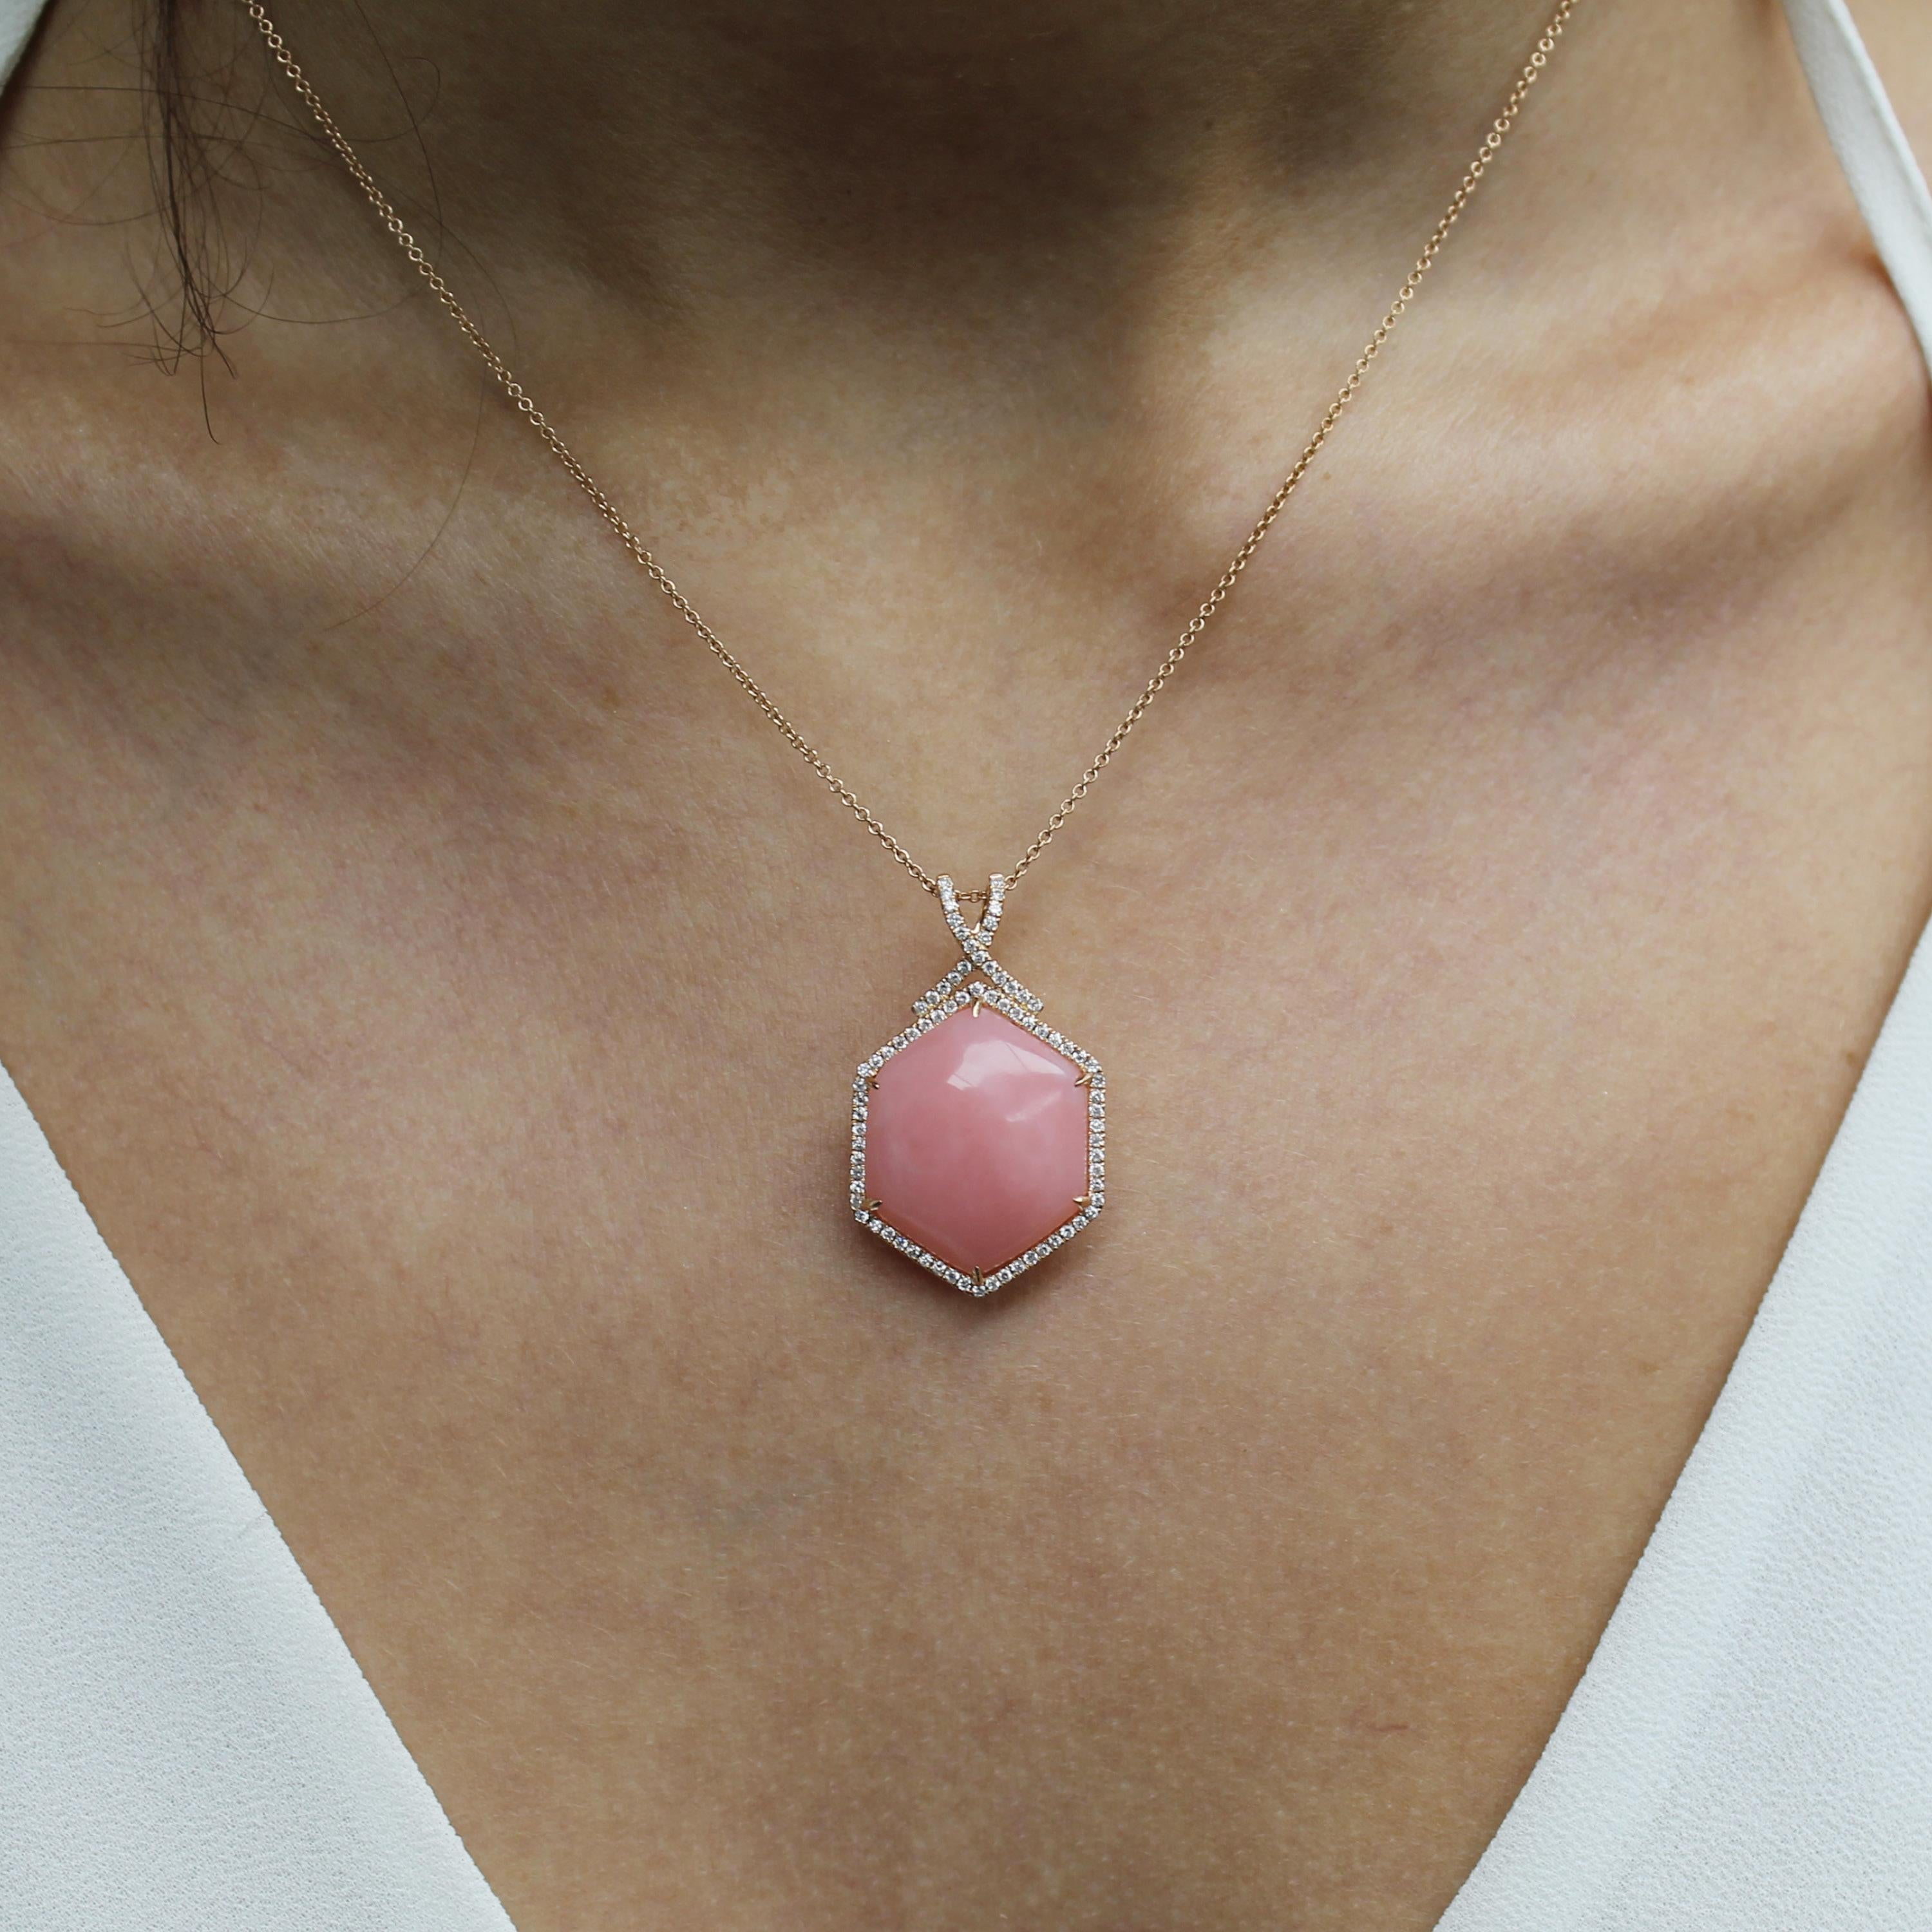 Dahlia Collection Necklace, featuring 18K Rose Gold with Hexagonal Cabochon-cut Pink Opal, a Diamond Halo, hanging on an 18K 18-inch chain with 16-inch adjuster. Pink Opal is a powerful stone, known for healing the emotions, especially those